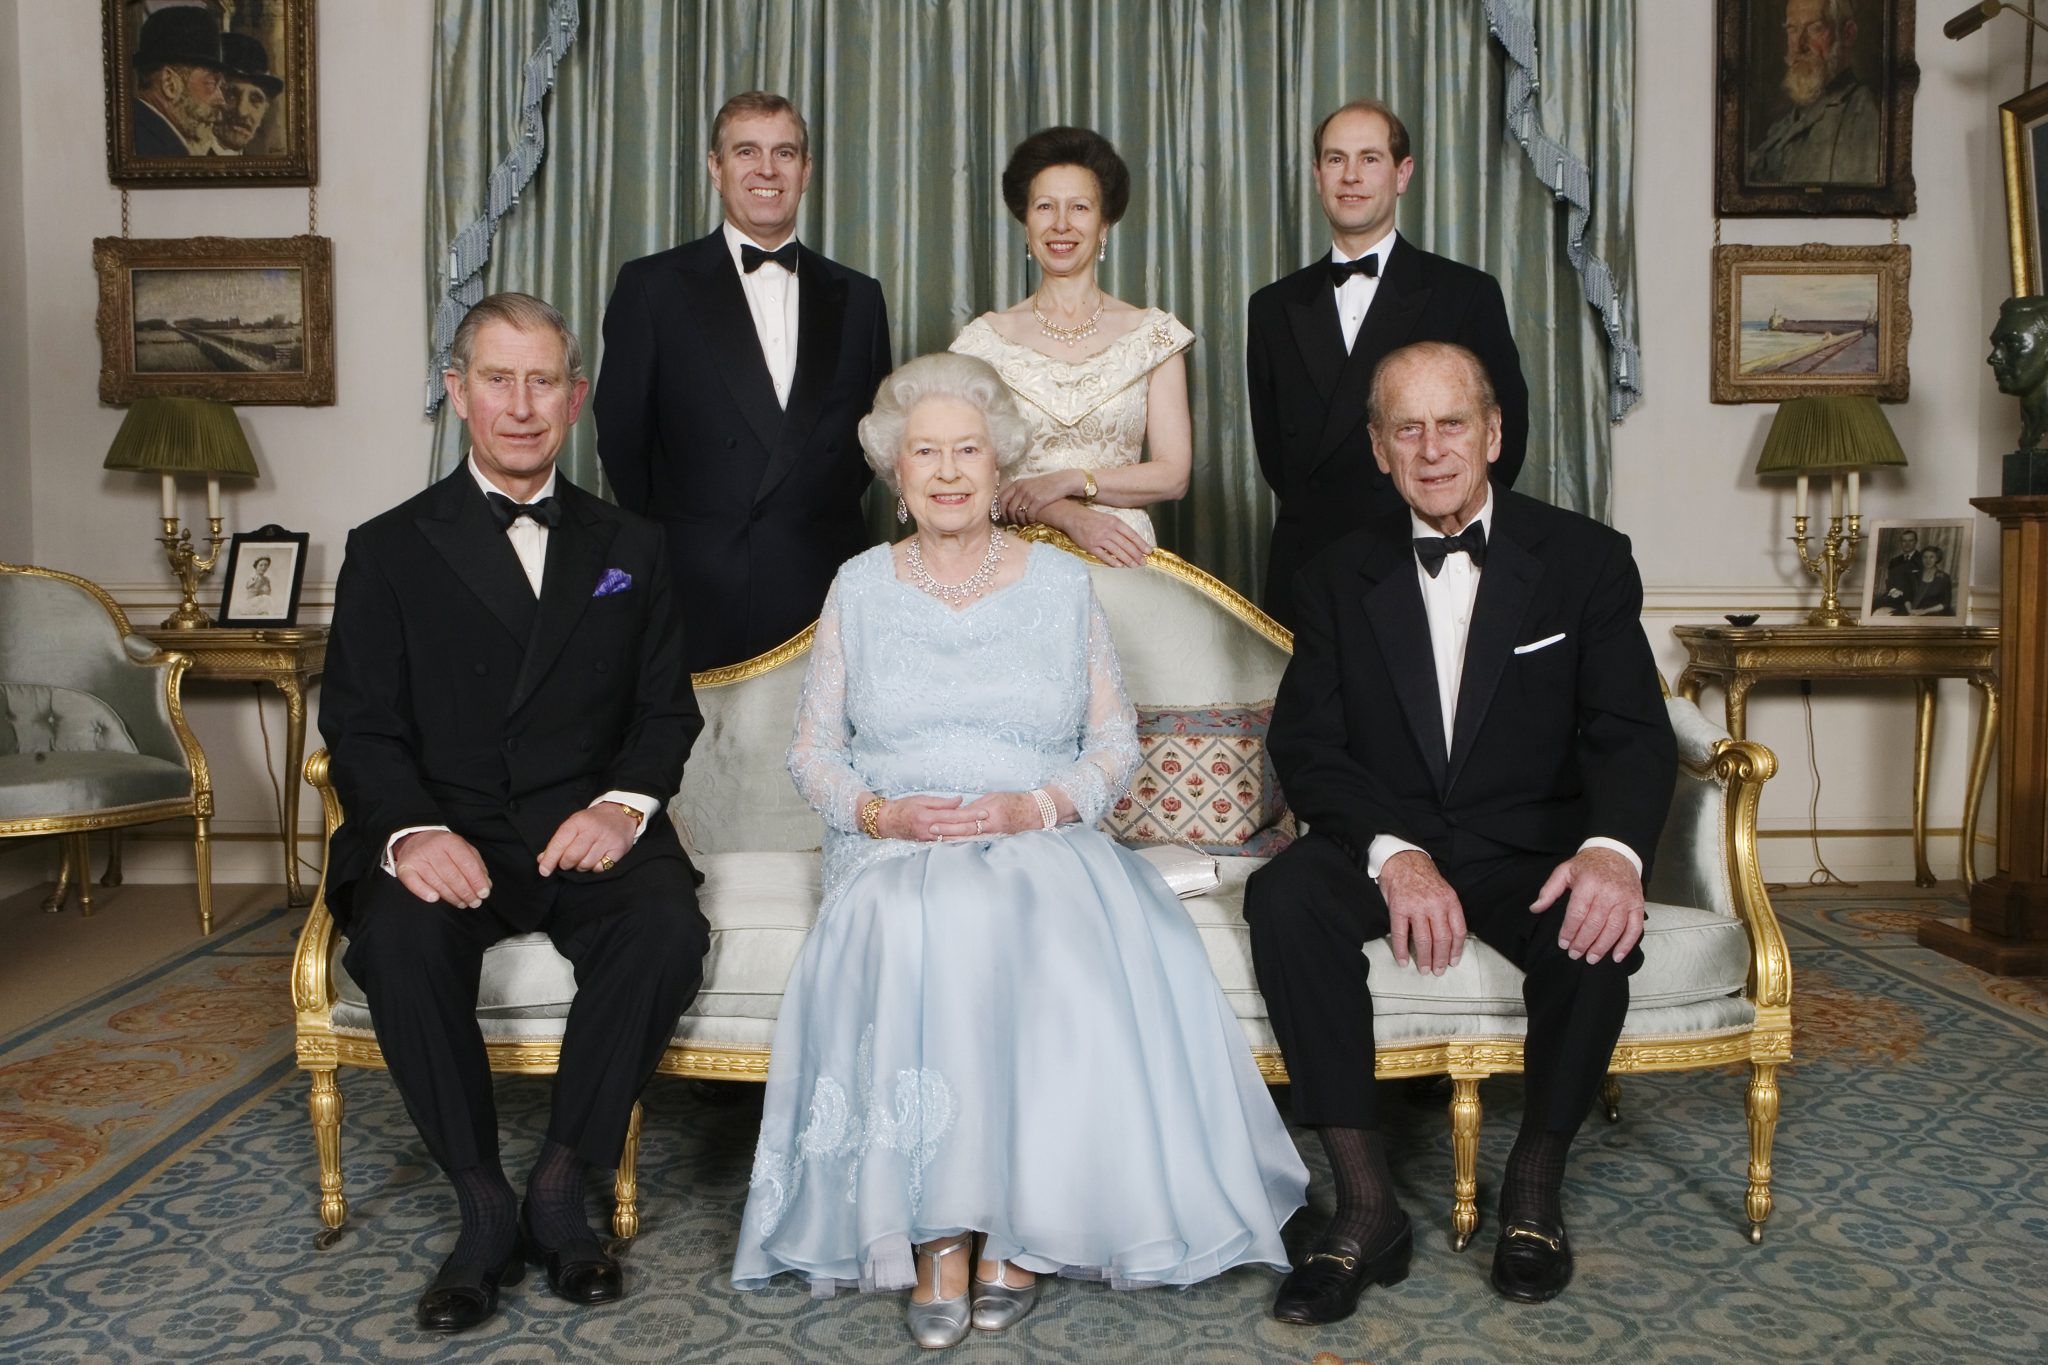 Back: Prince Andrew, Princess Anne, Prince Edward, Front: Prince Charles, Queen Elizabeth II, Prince Philip